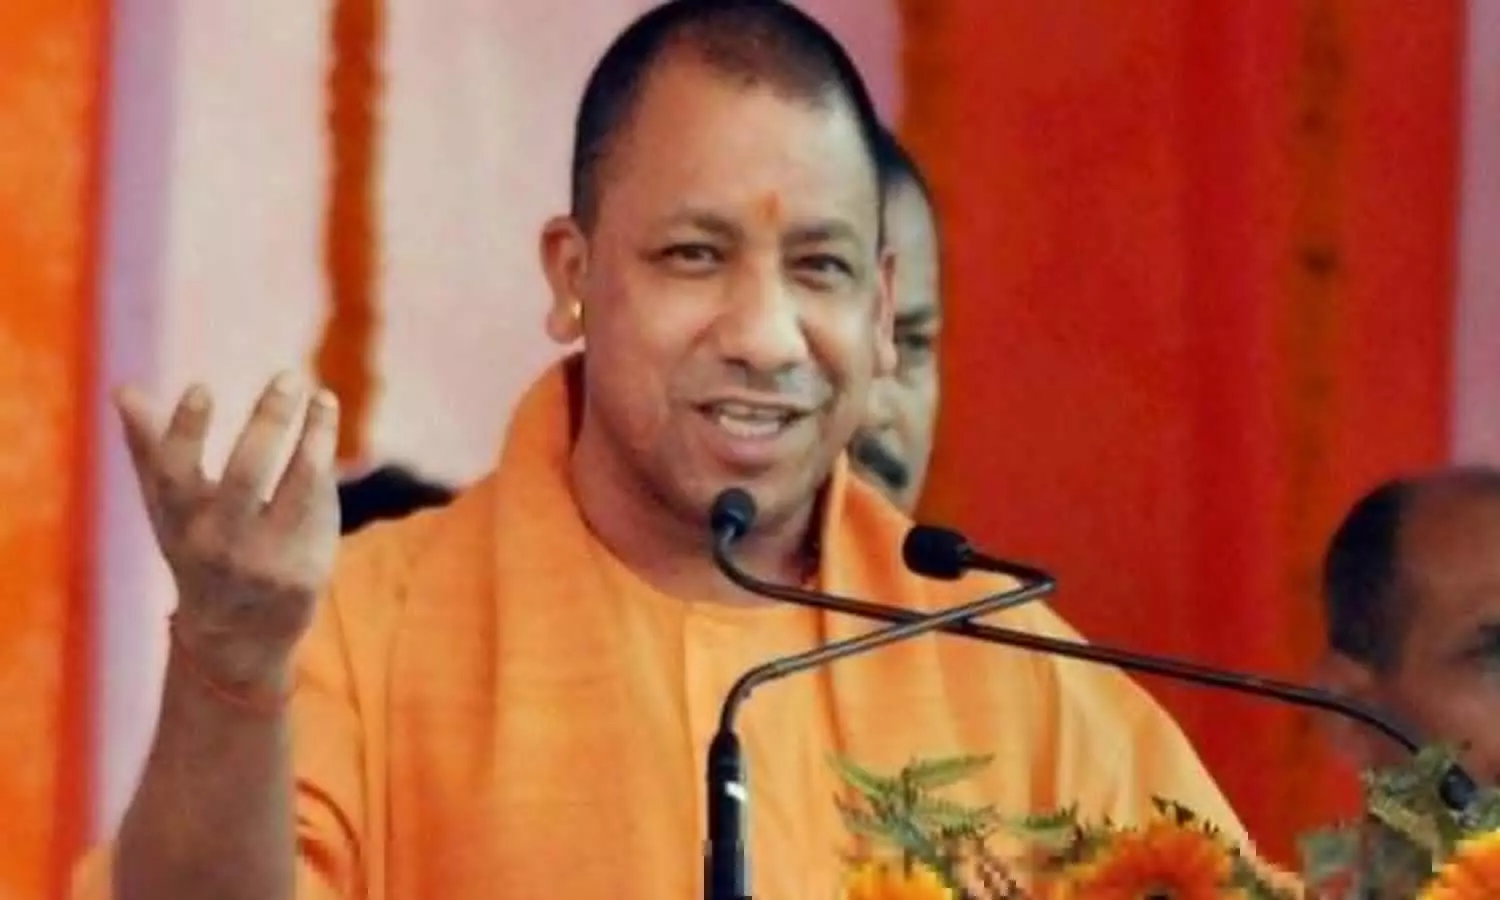 Gorakhpur News: CM Yogi said - Gorakhpur was once compared to Chicago, now it is decided to run a bulldozer in hooliganism